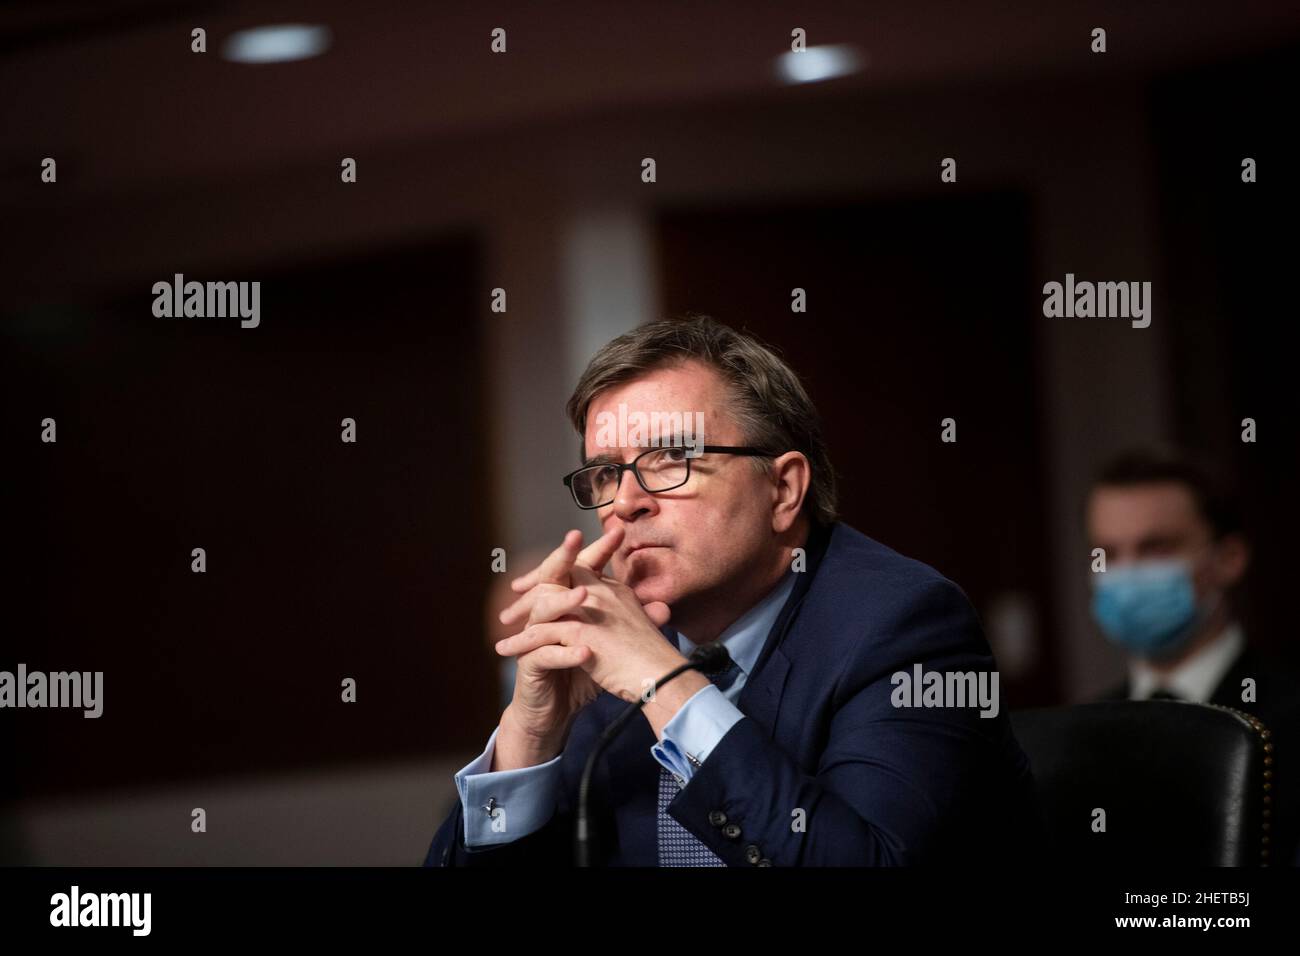 James o brien hi-res stock photography and images - Alamy